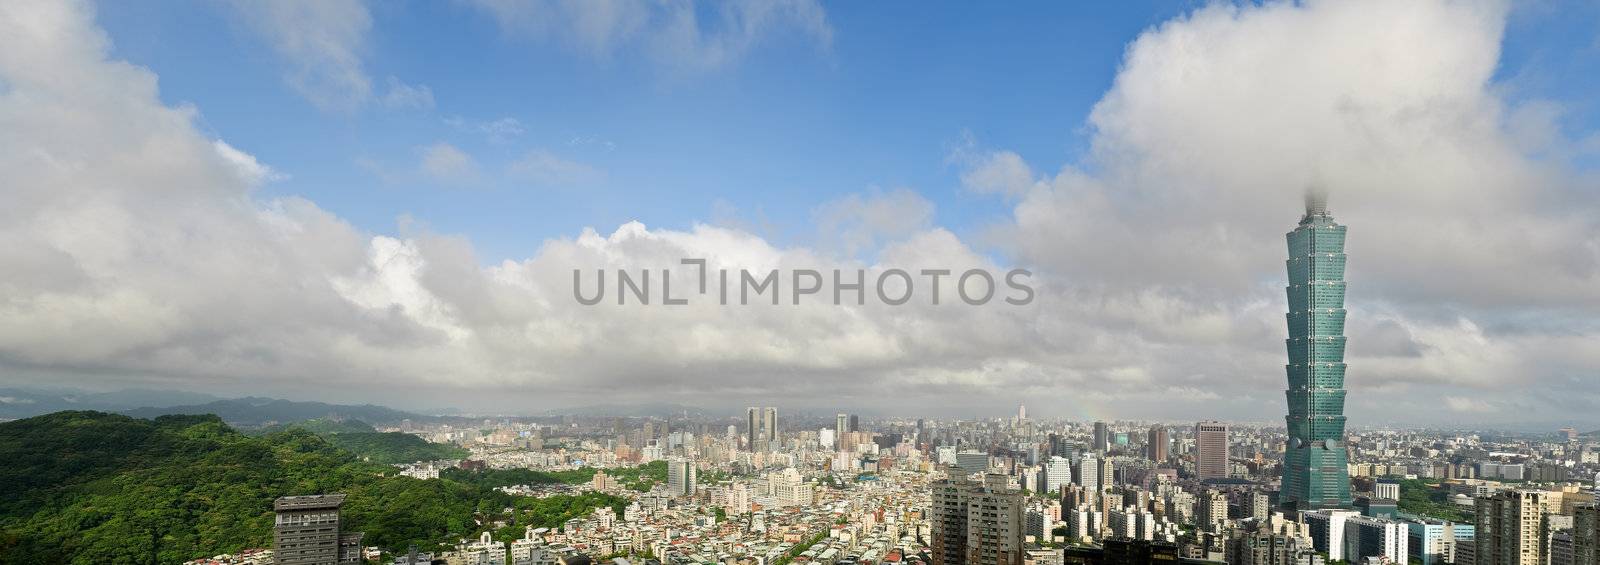 Taipei city skyline with famous 101 skyscraper building under white clouds and blue sky in Taiwan. Horizontal panoramic cityscape.